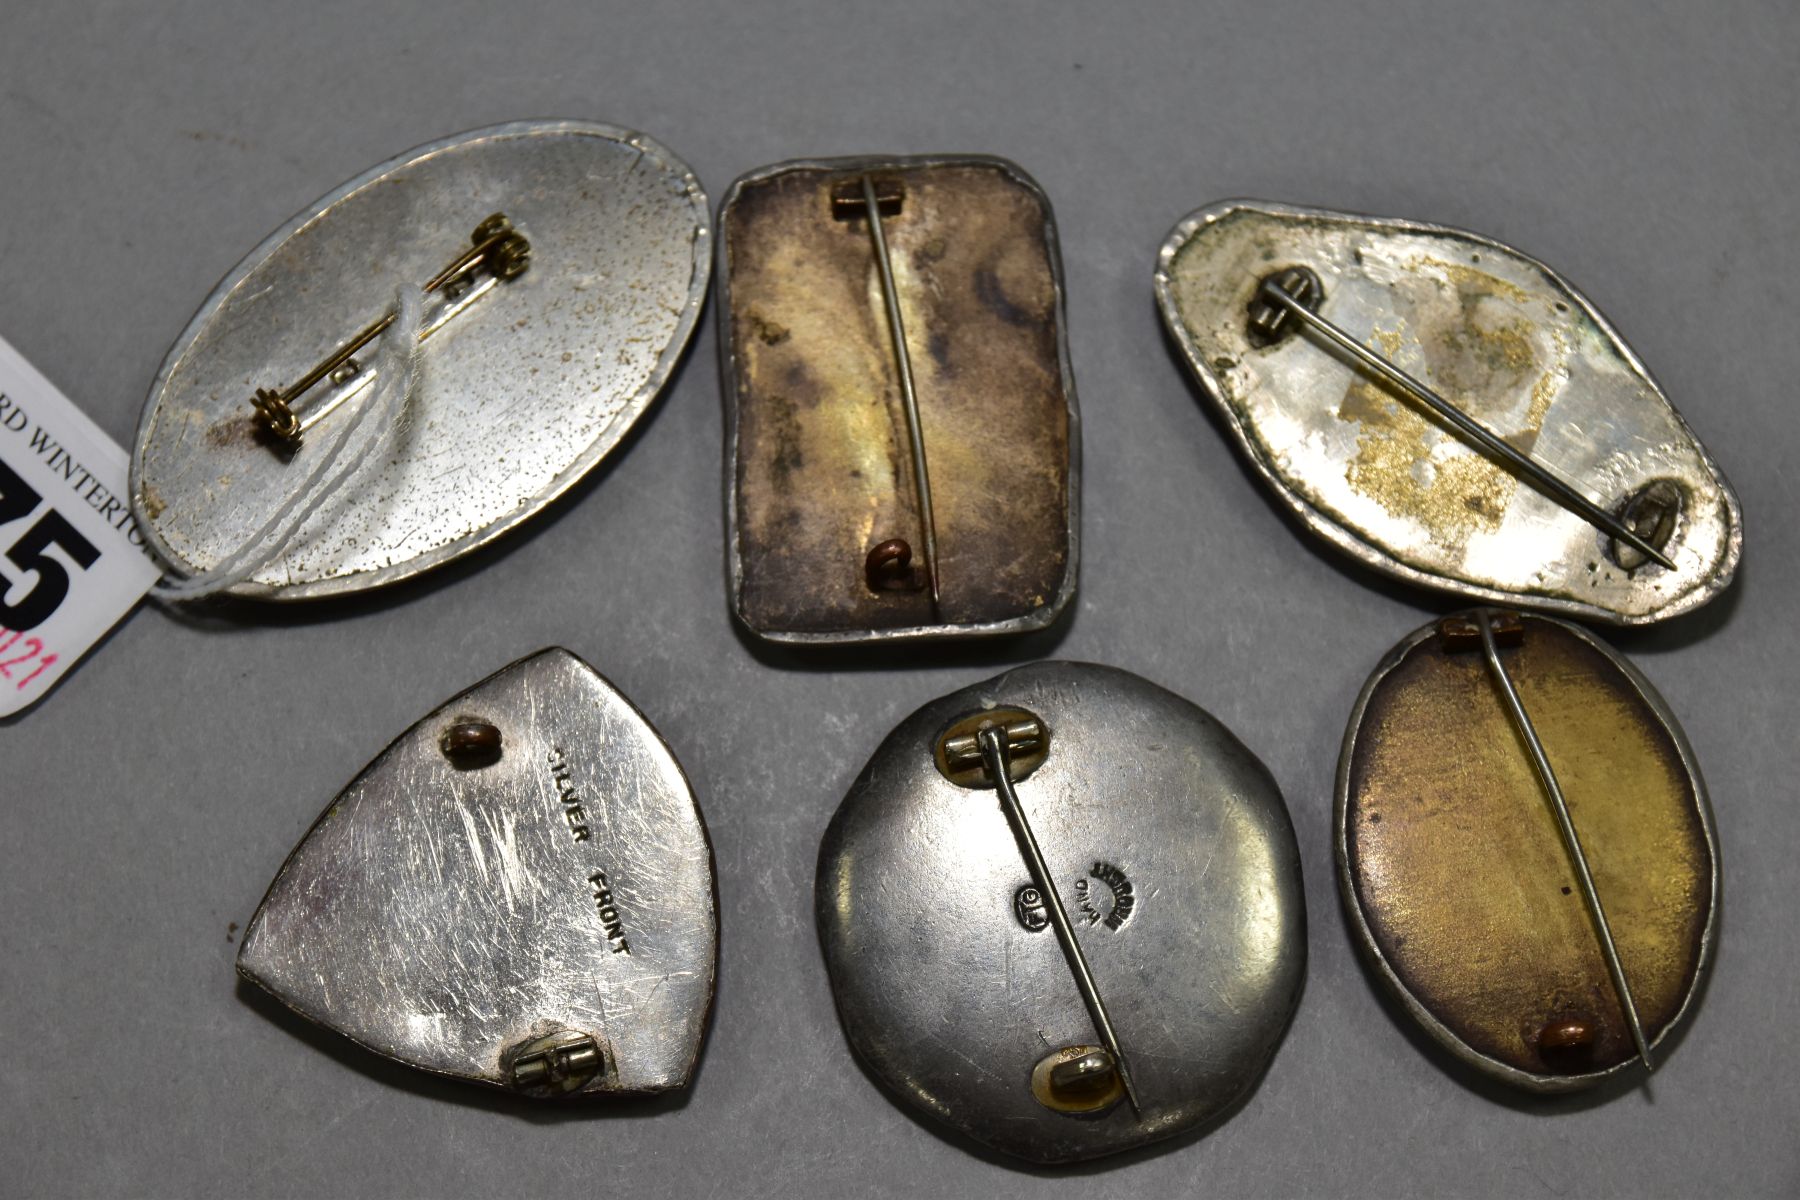 SIX RUSKIN STYLE BROOCHES, five enamels set into pewter, one stamped FTG hand wrought, one enamel - Image 3 of 3